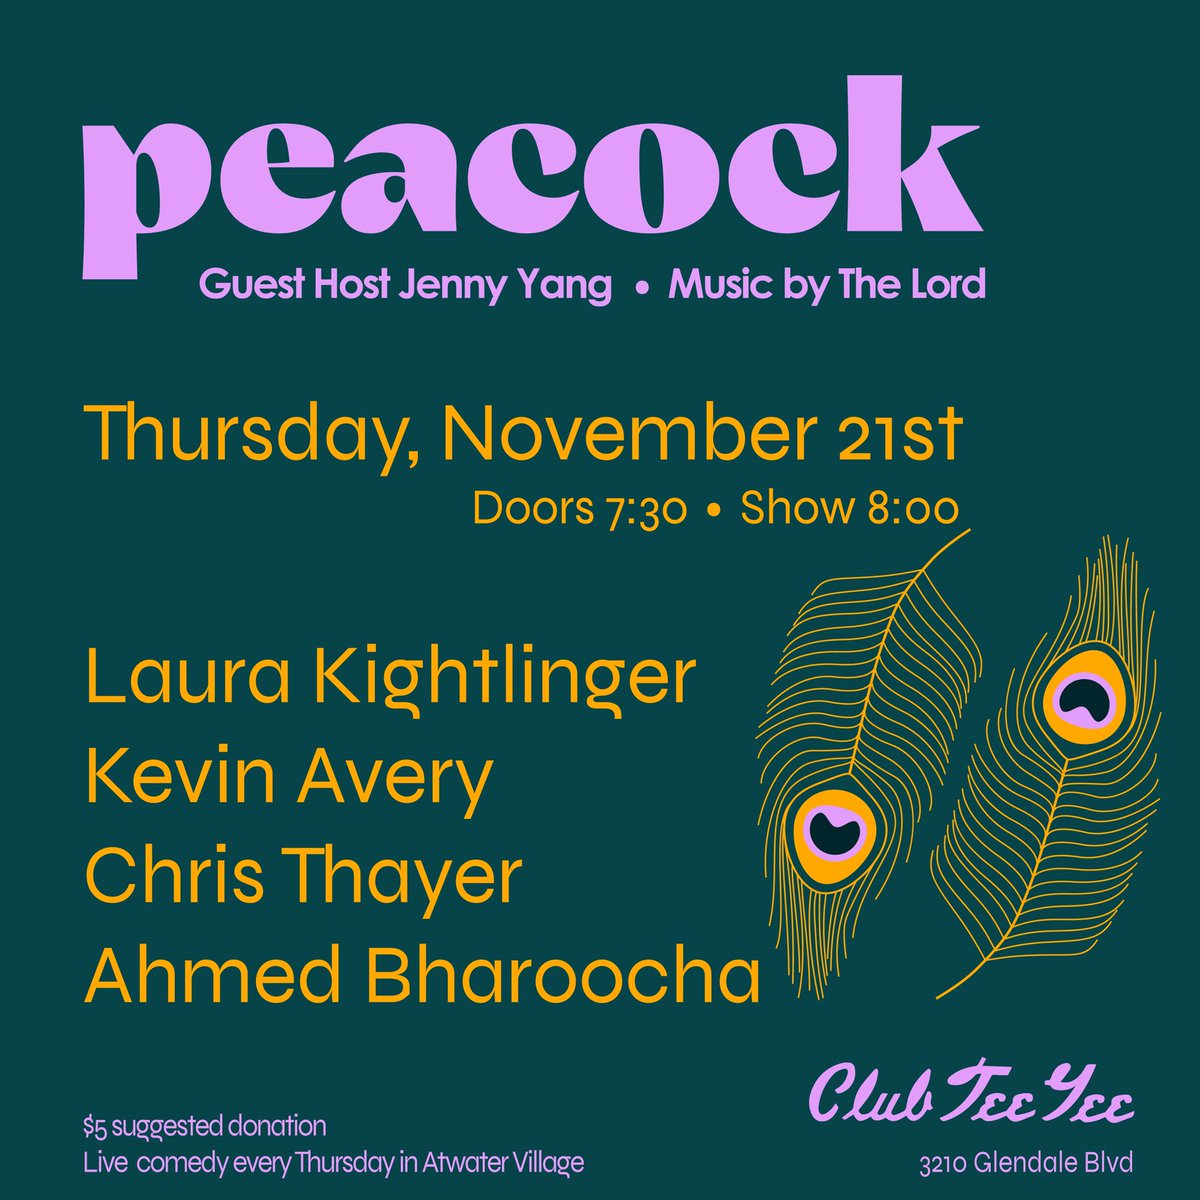 Come stuff yourself with laughs to hold you over til December! (We’re off on Turkey Day, you peacocks.) 🦚🦃 eventbrite.com/e/peacock-a-co… #livecomedy #standupcomedy #comedy #comedians #funny #jokes #atwatervillage #jennyyang #laurakightlinger #kevinavery #christhayer #ahmedbharoocha